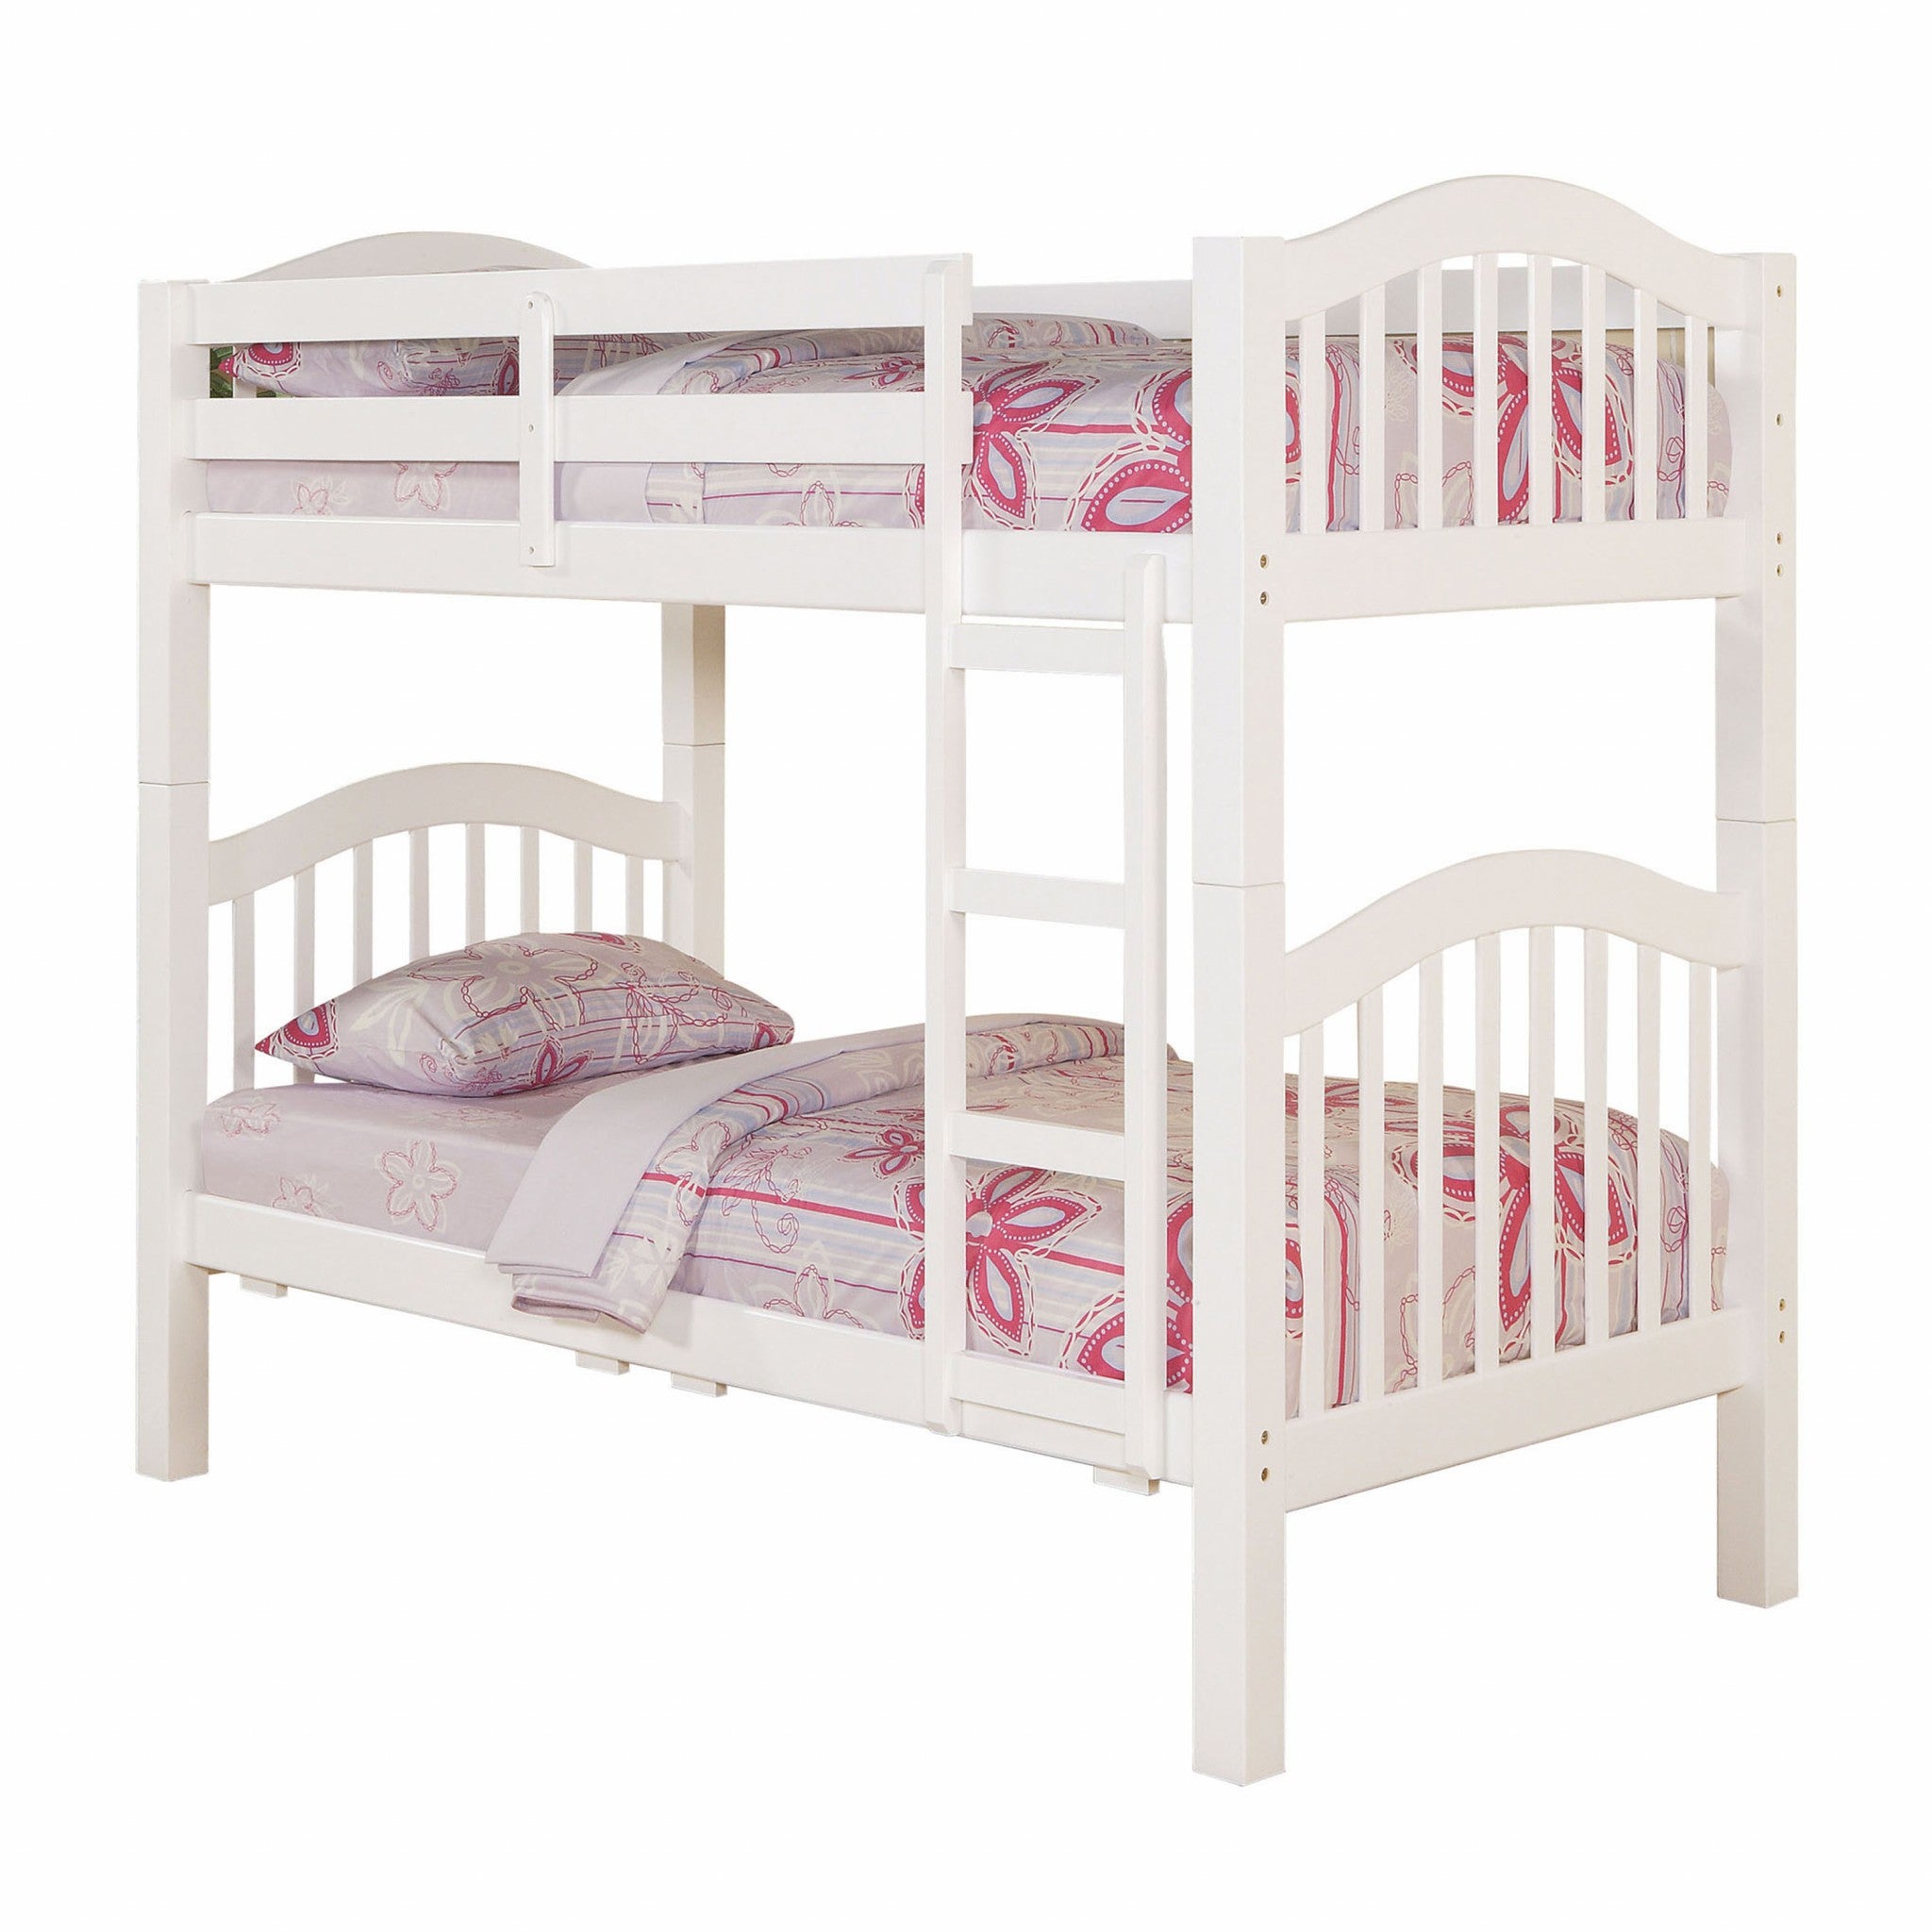 80" X 43" X 69" White Pine Wood Twin Over Twin Bunk Bed Default Title